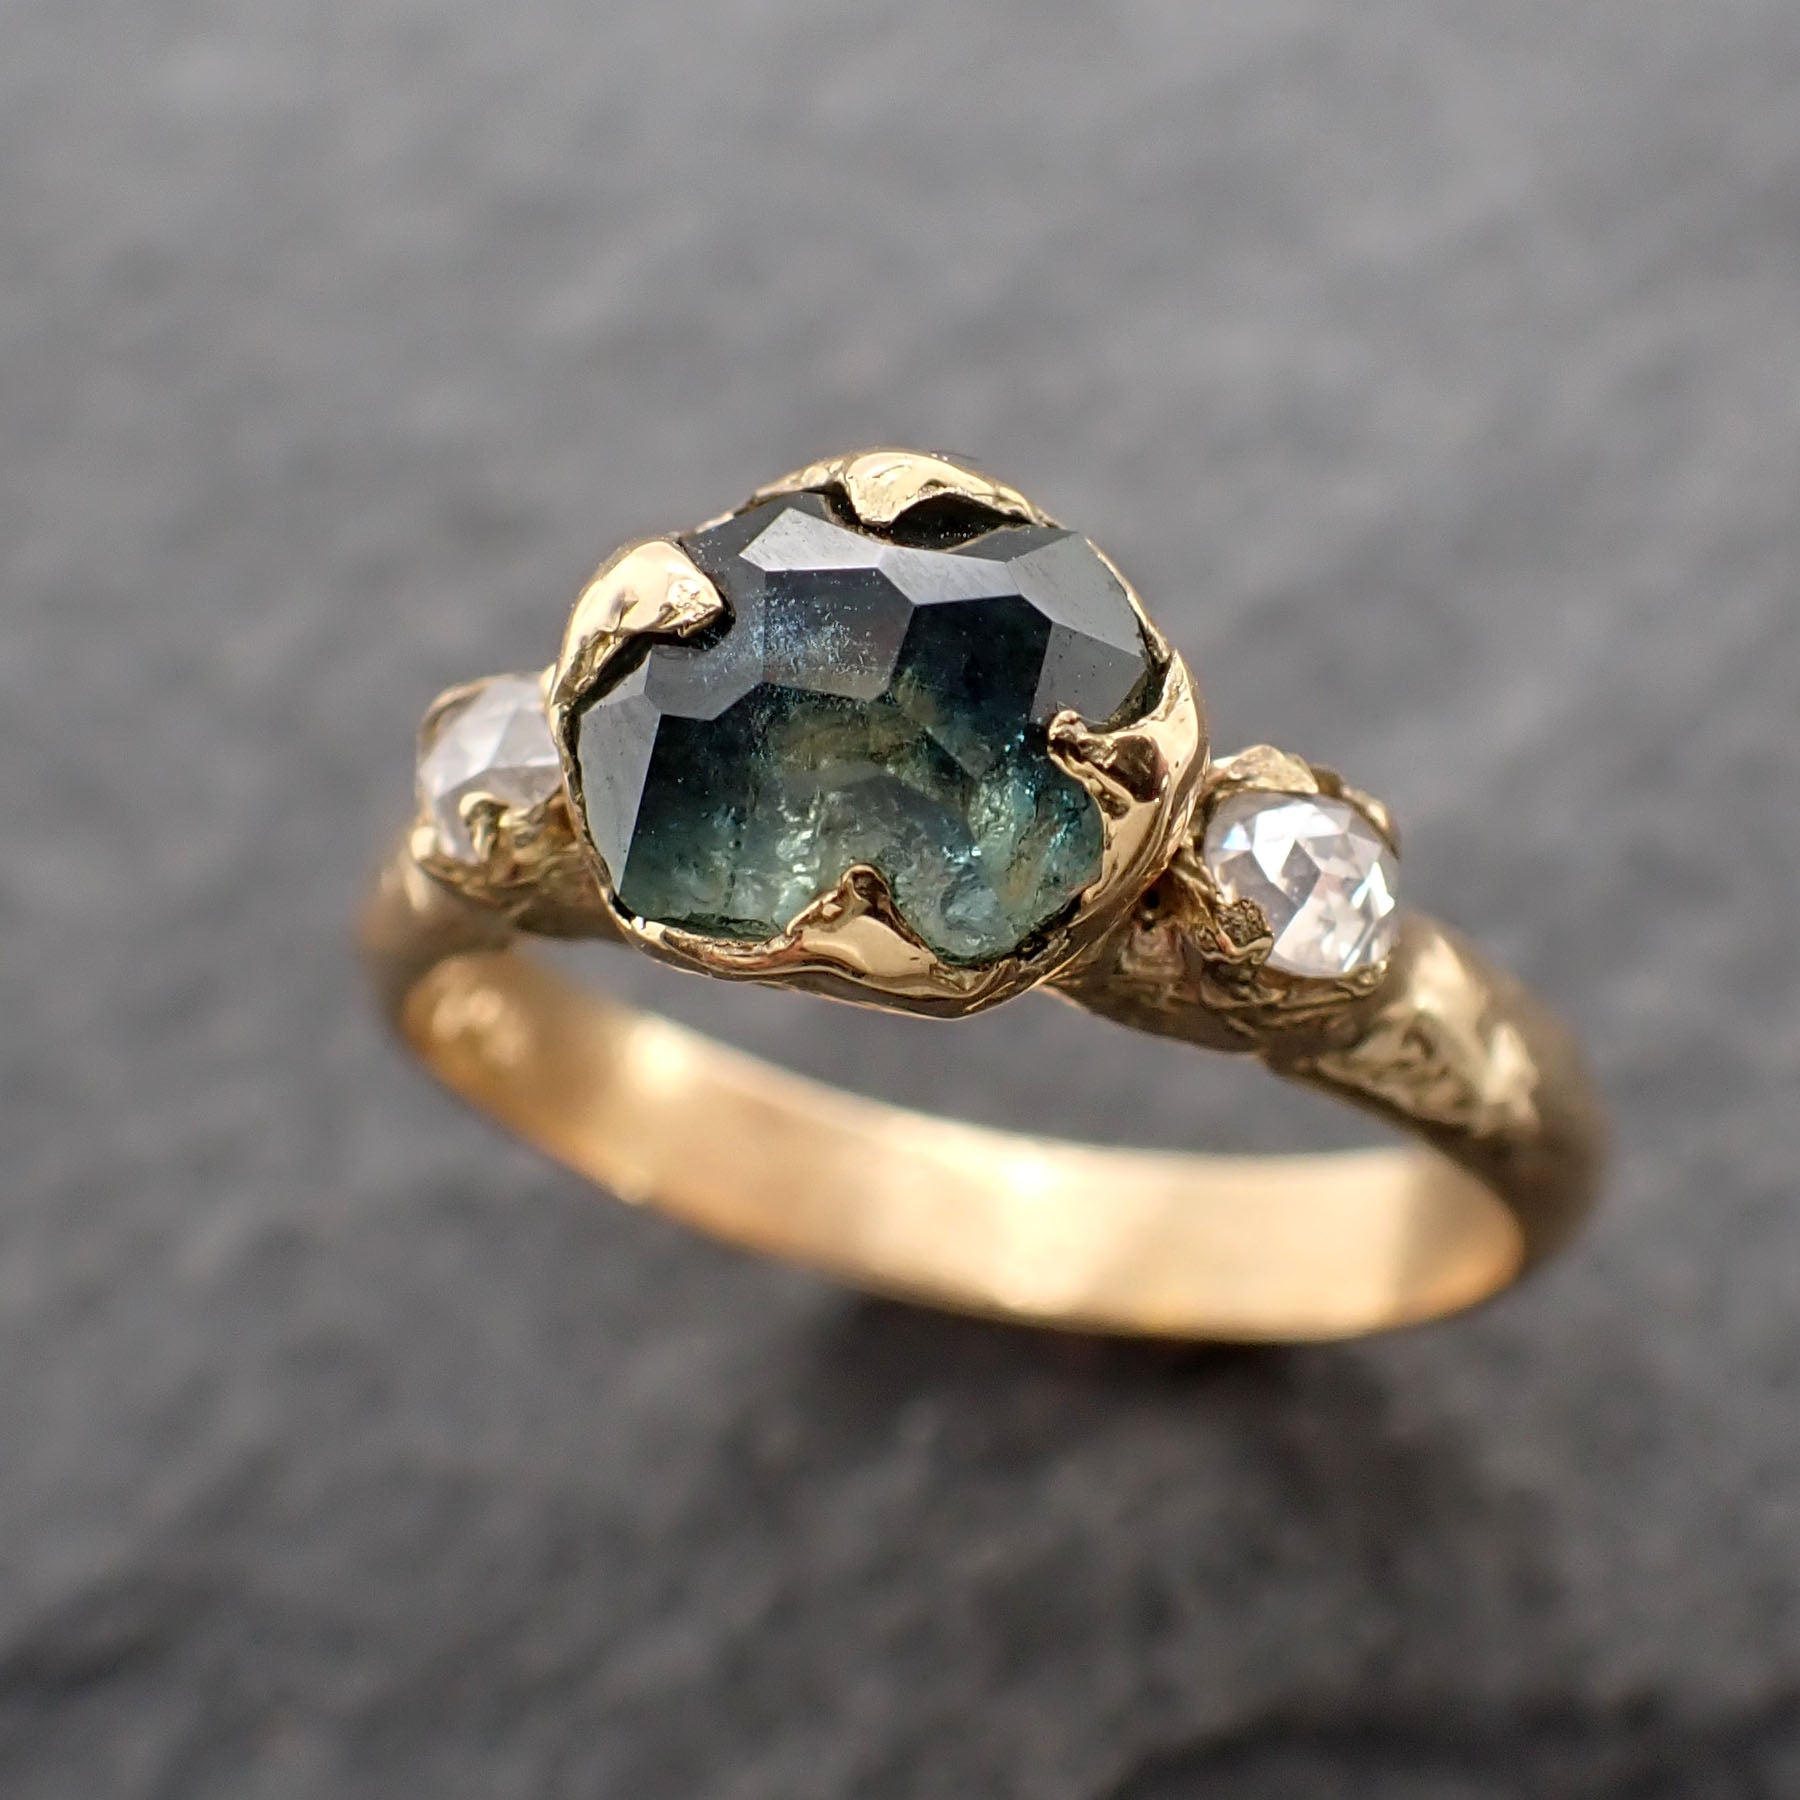 Partially faceted blue Montana Sapphire and fancy Diamonds 18k Yellow Gold Engagement Wedding Ring Gemstone Ring Multi stone Ring 2487